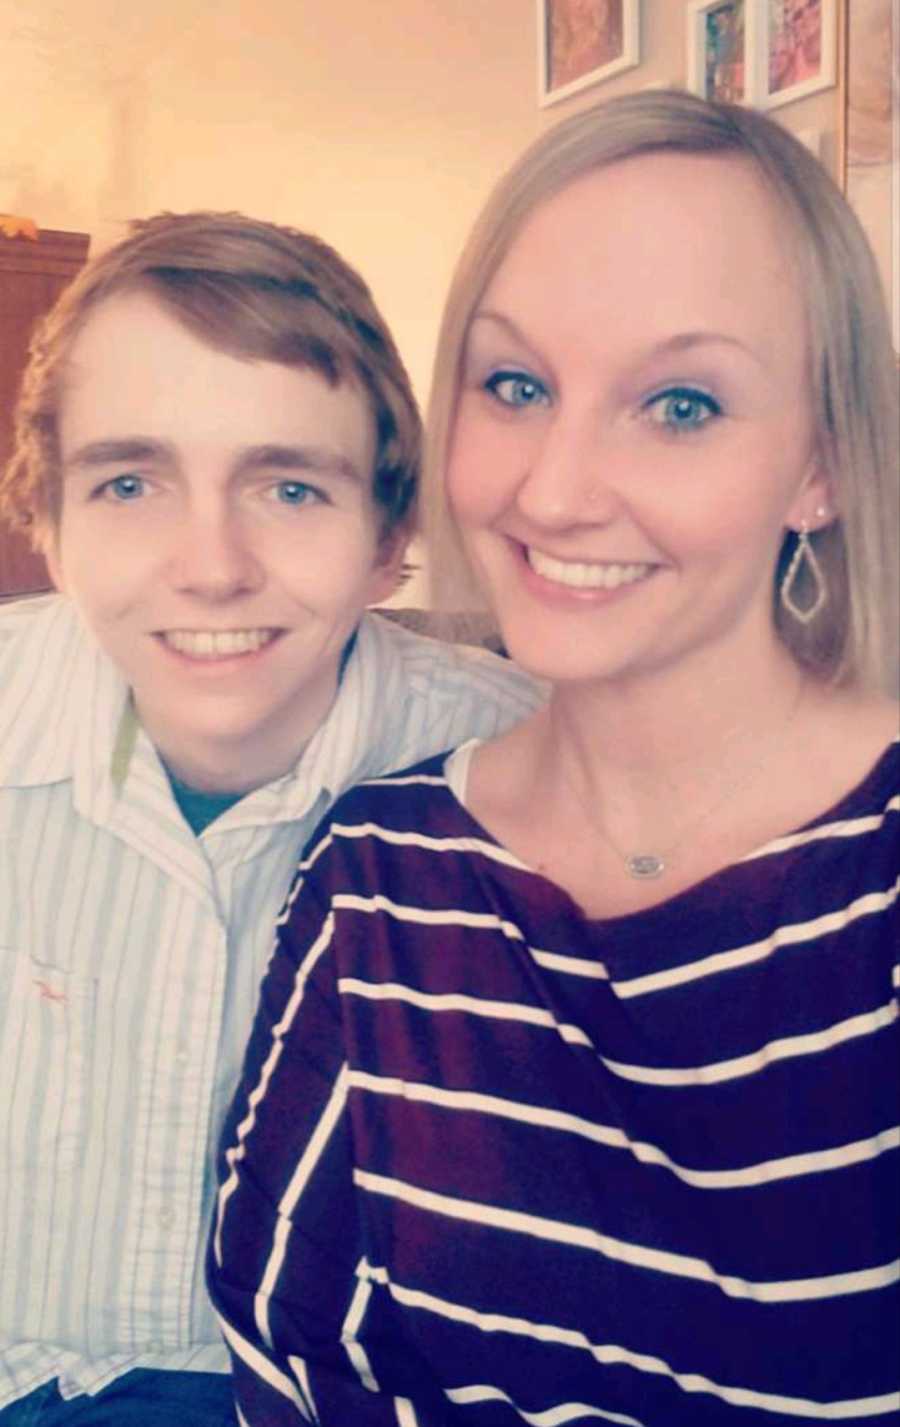 Young woman smiles in selfie with brother who will become addicted to drugs